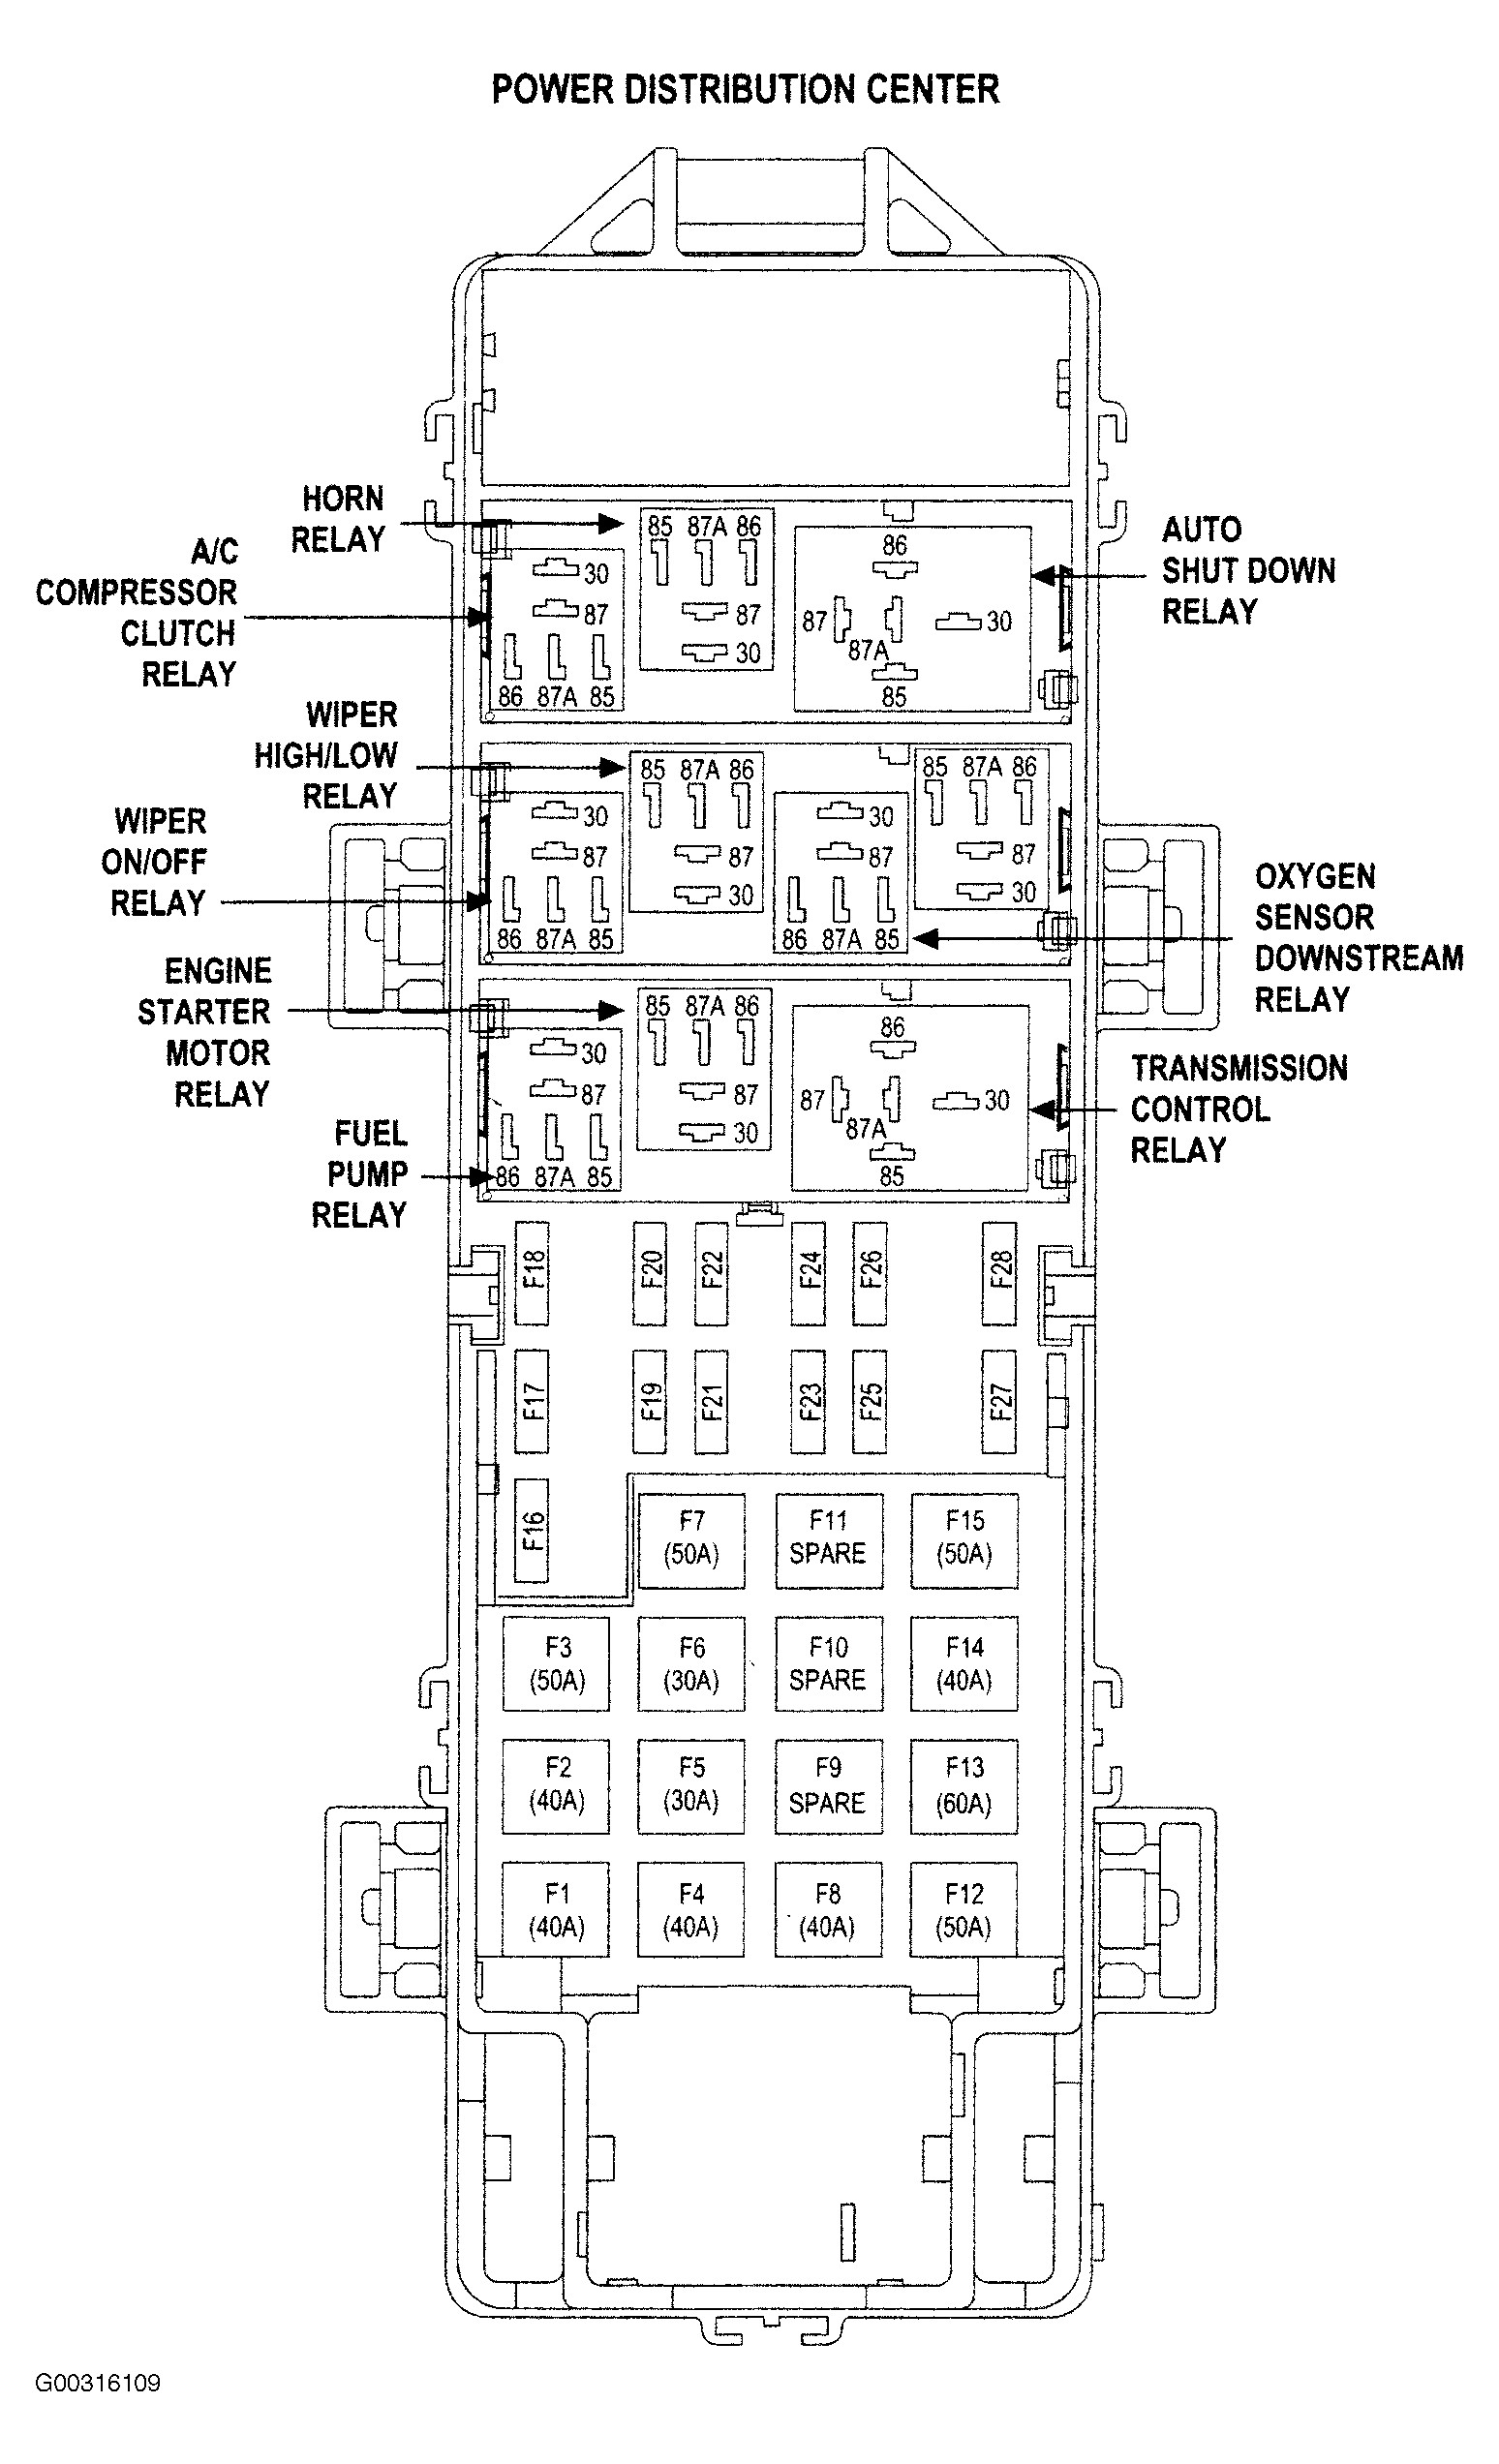 2001 Jeep Wrangler Engine Diagram is there A Fuse for the Transmission On A 03 Jeep Grand with Of 2001 Jeep Wrangler Engine Diagram